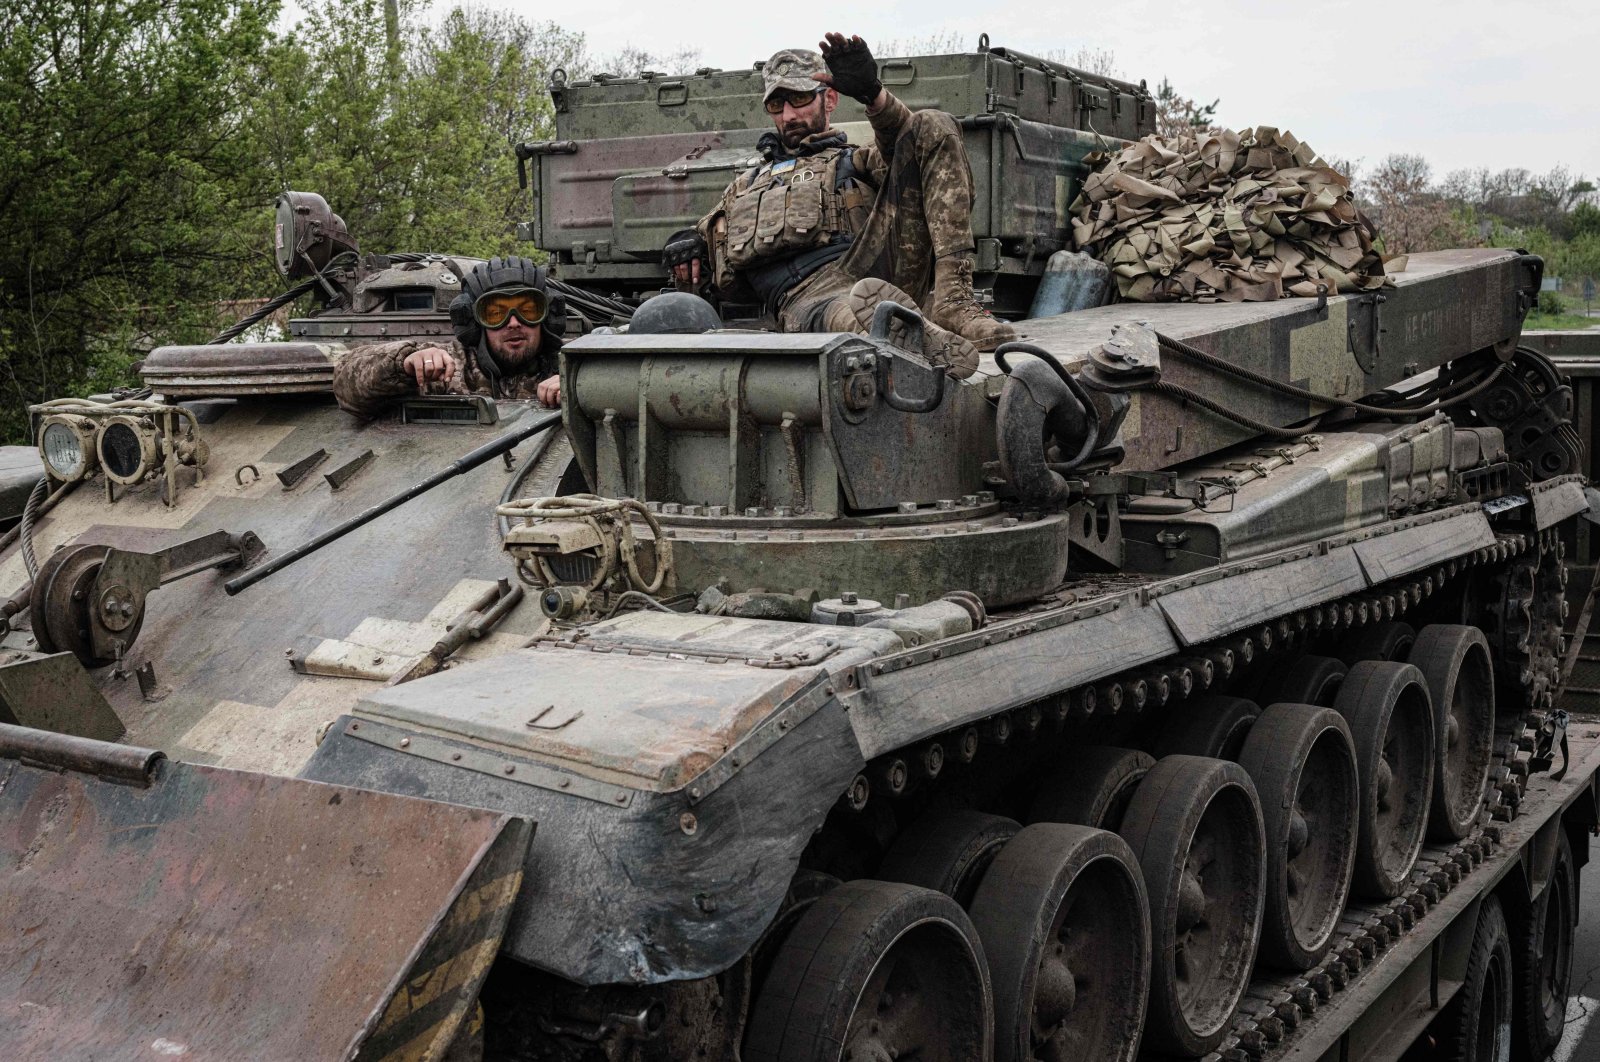 Ukrainian soldiers gesture on an armored engineering vehicle carried on a tank transporter near Kramatorsk, eastern Ukraine, on April 30, 2022, amid the Russian invasion of Ukraine. (Photo by Yasuyoshi CHIBA / AFP)